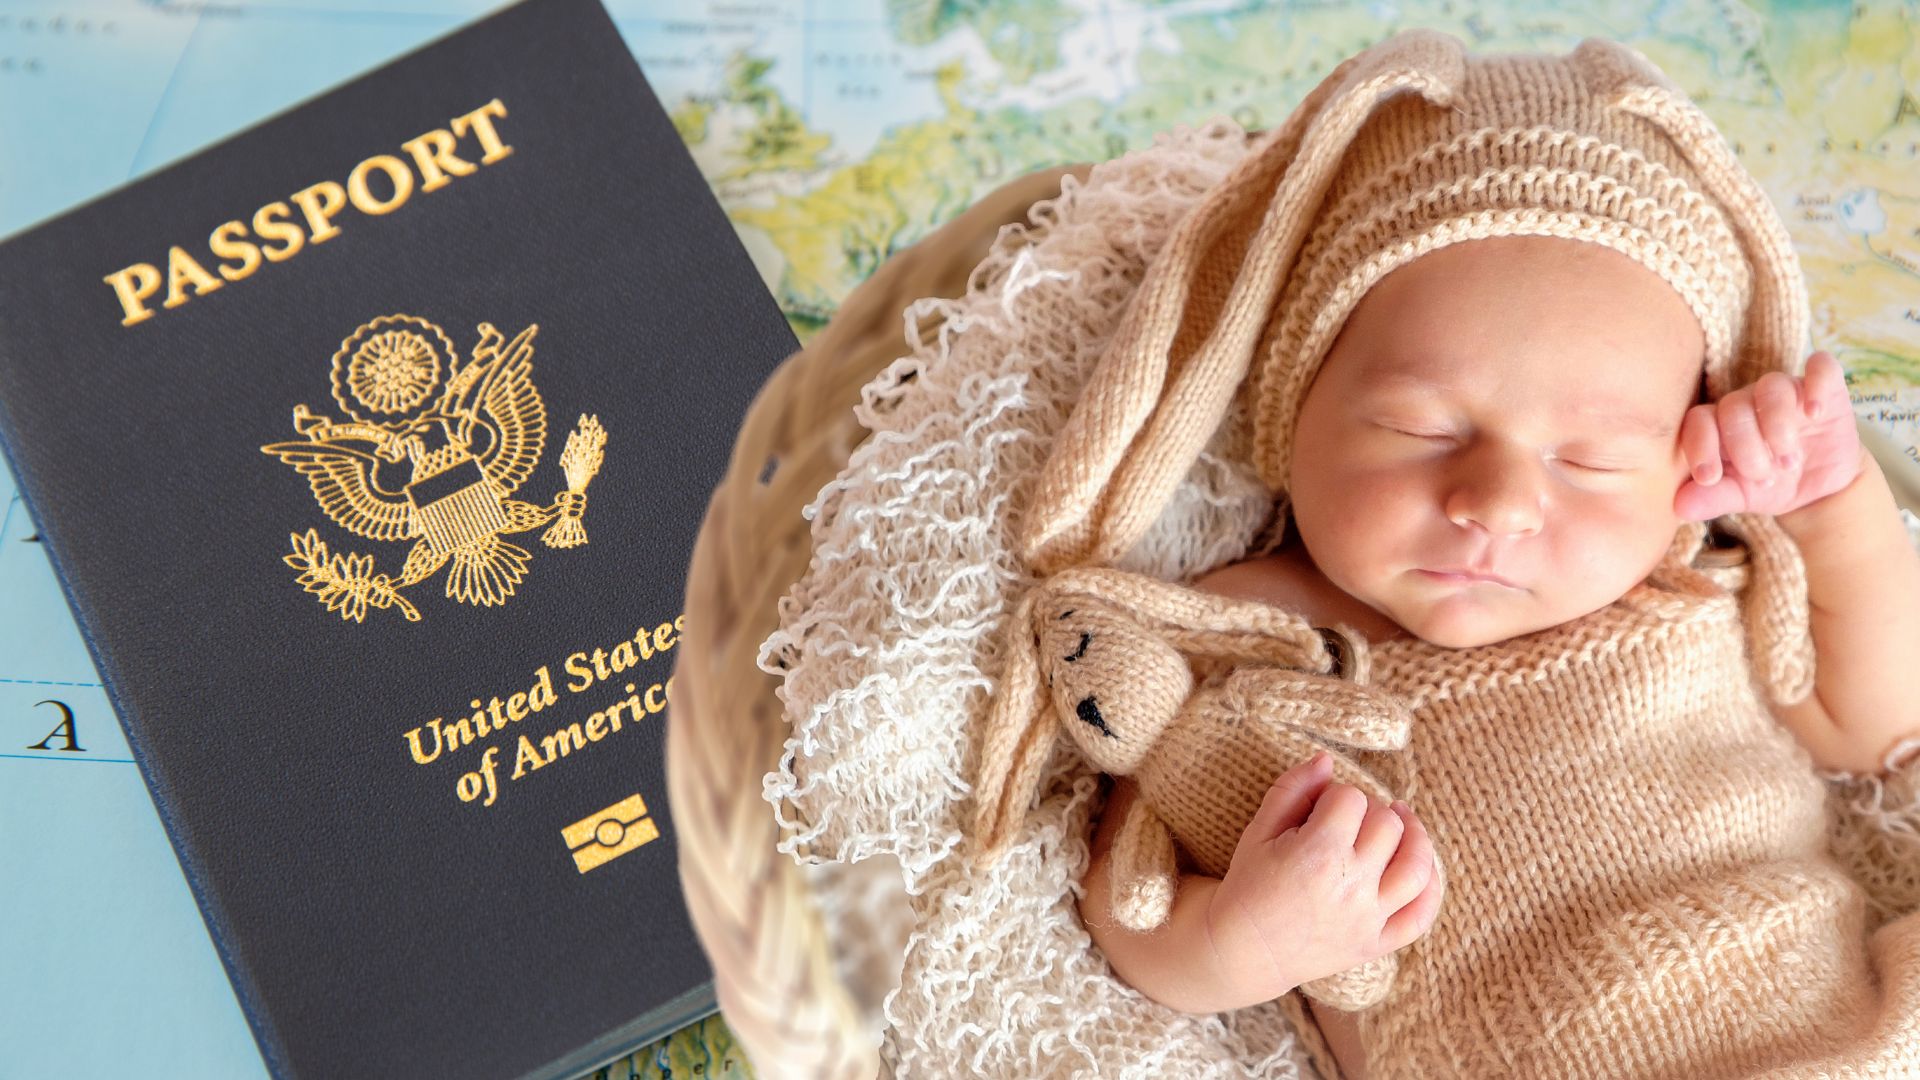 Surrogacy Passports: Experience surrogacy passport excellence with us.